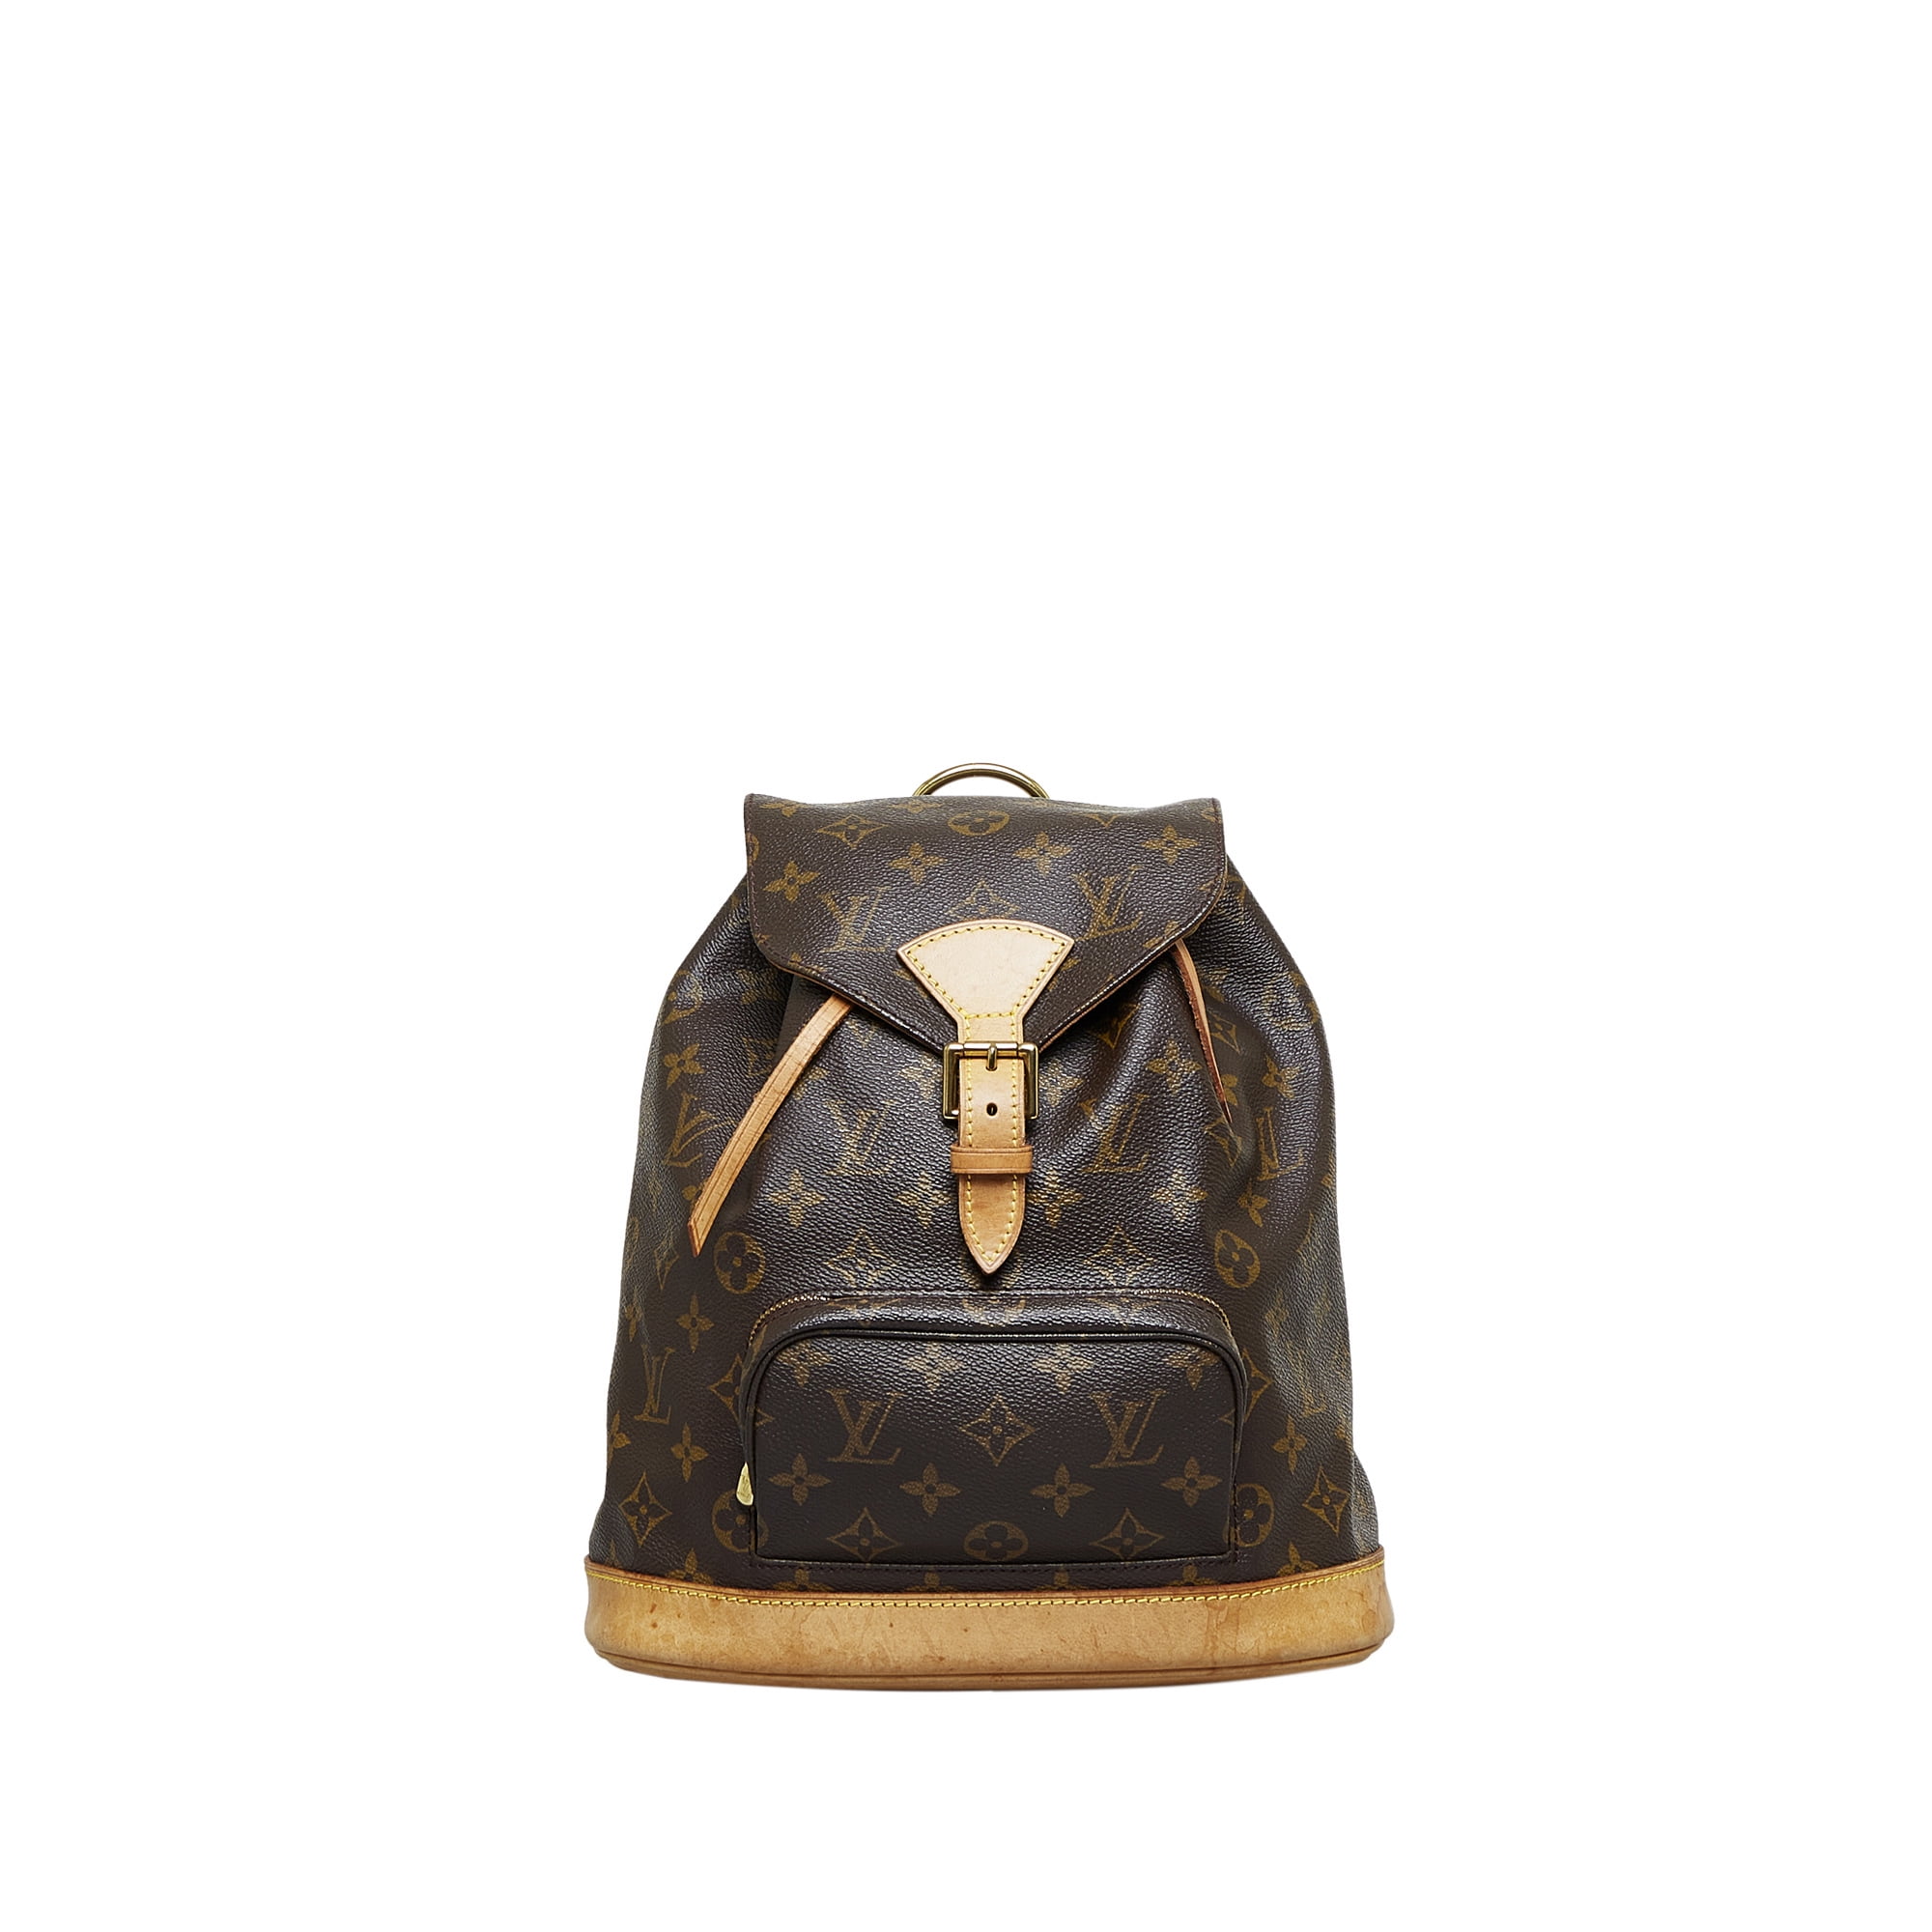 Montsouris Mm Backpack (Authentic Pre-Owned)  Unisex bag, Brown backpacks, Louis  vuitton monogram